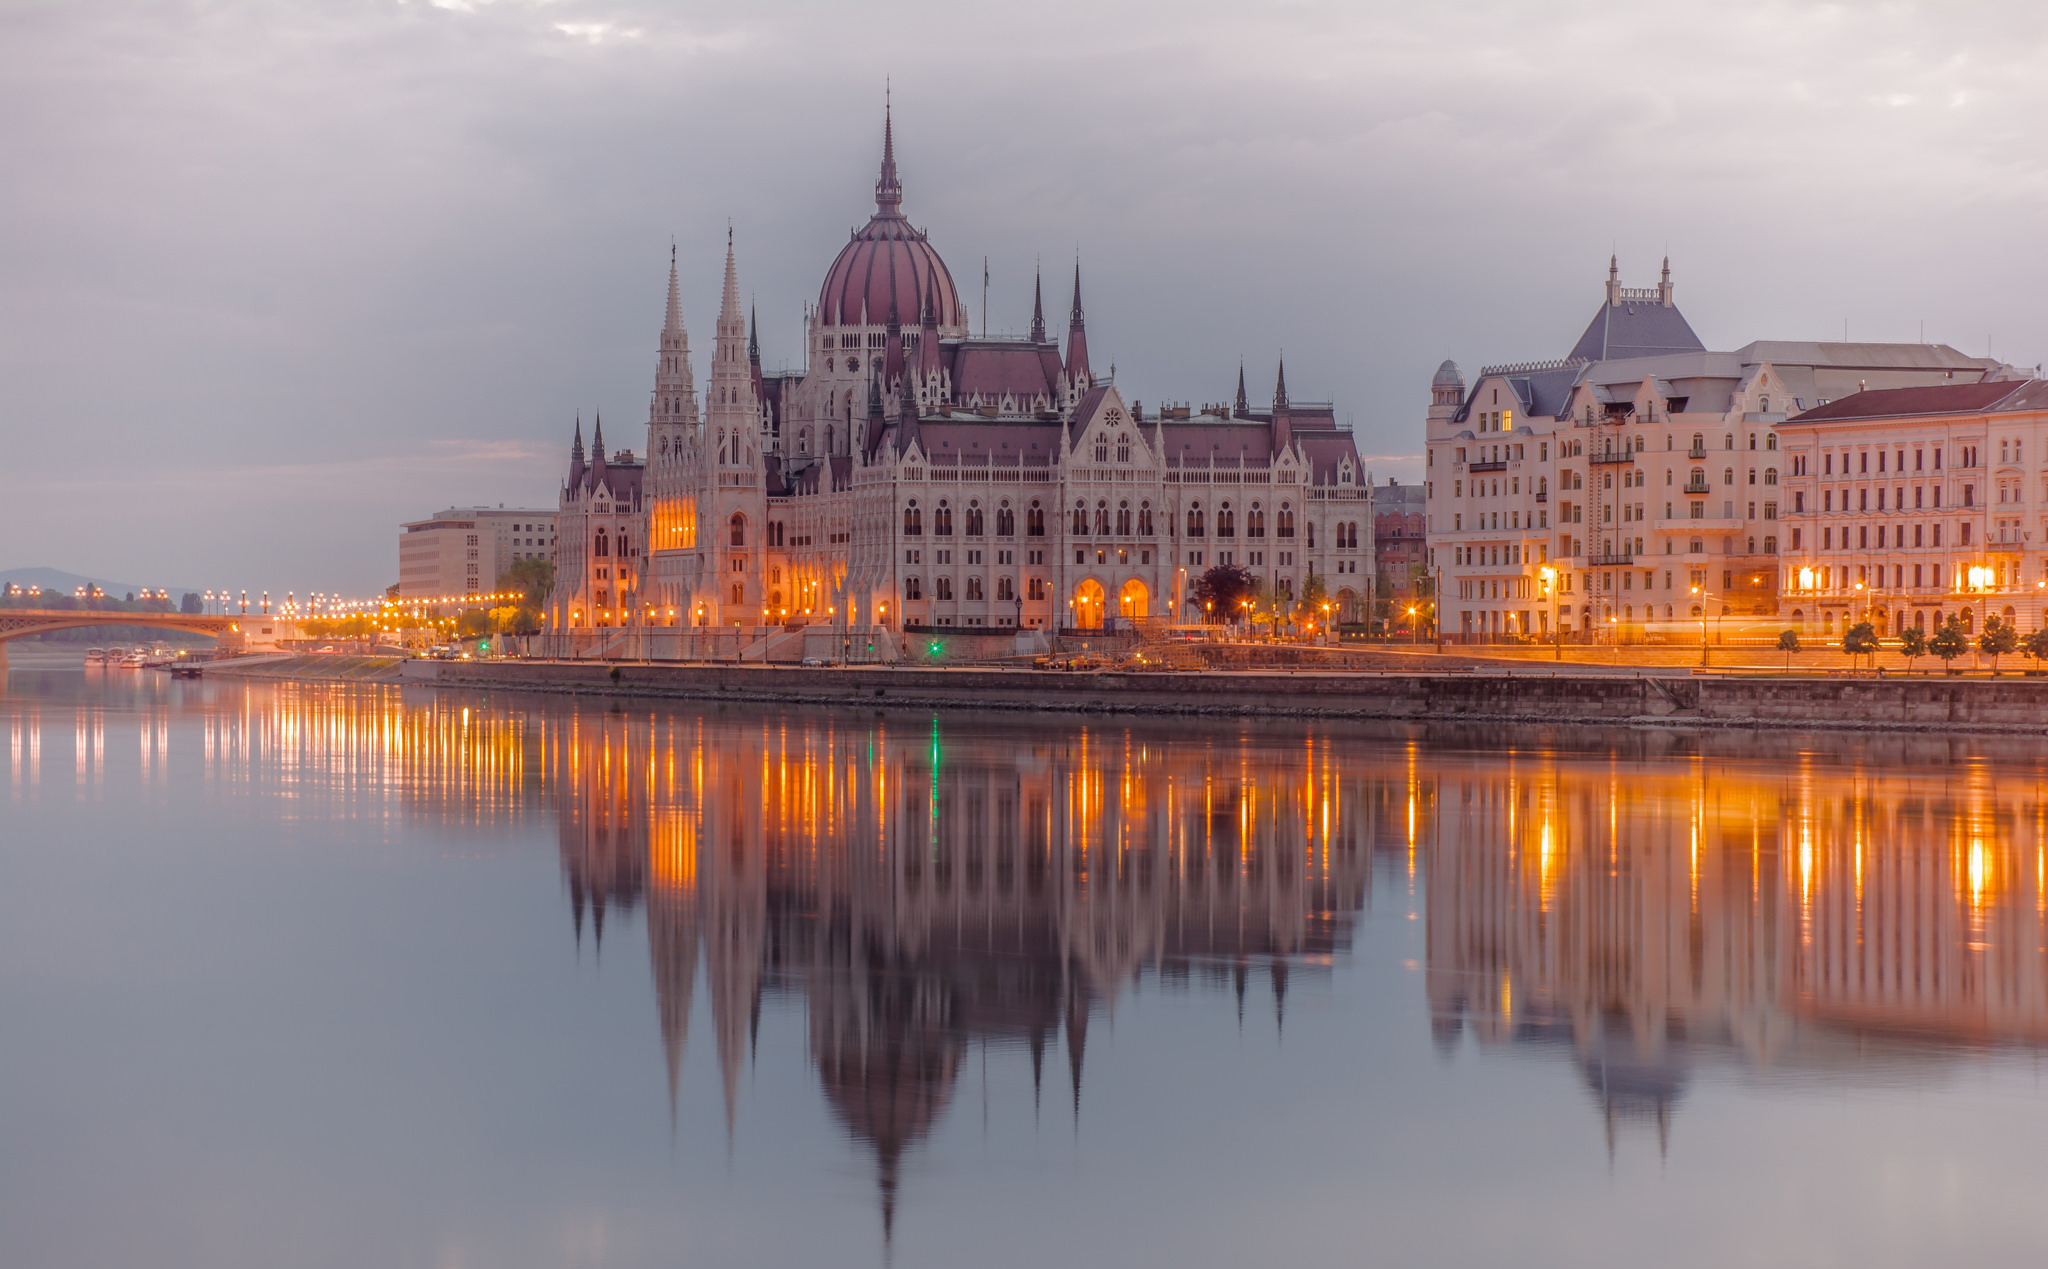 man made, hungarian parliament building, architecture, budapest, building, danube, hungary, monument, reflection, river, monuments